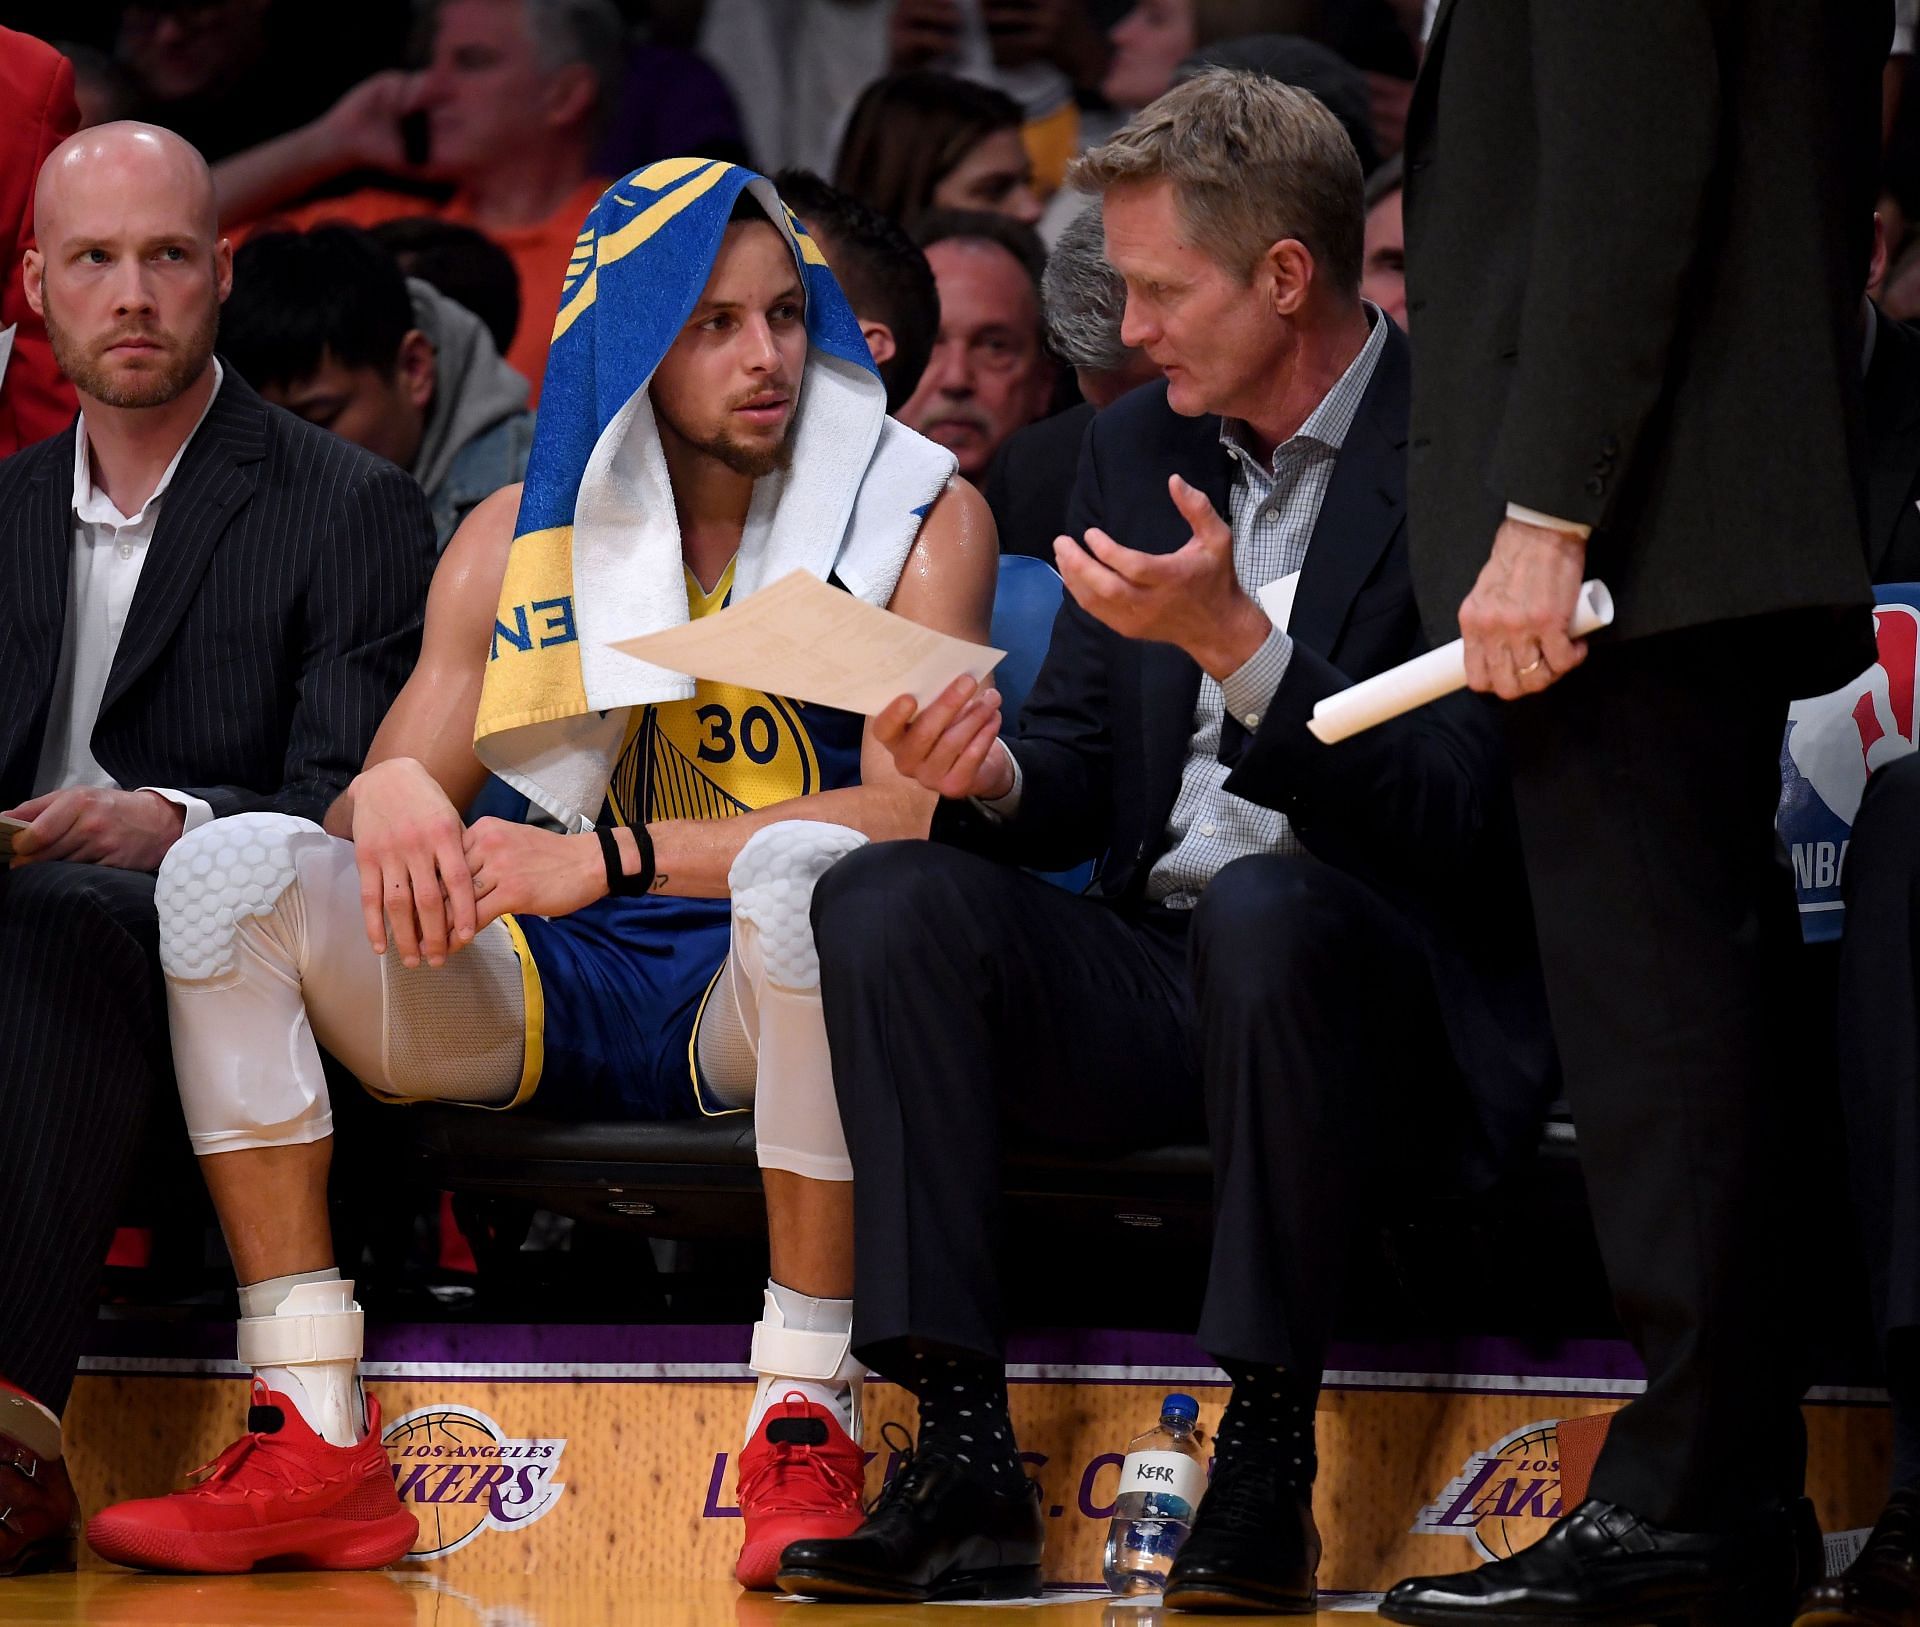 Steph Curry's Mom & Dad Consulted by Steve Kerr